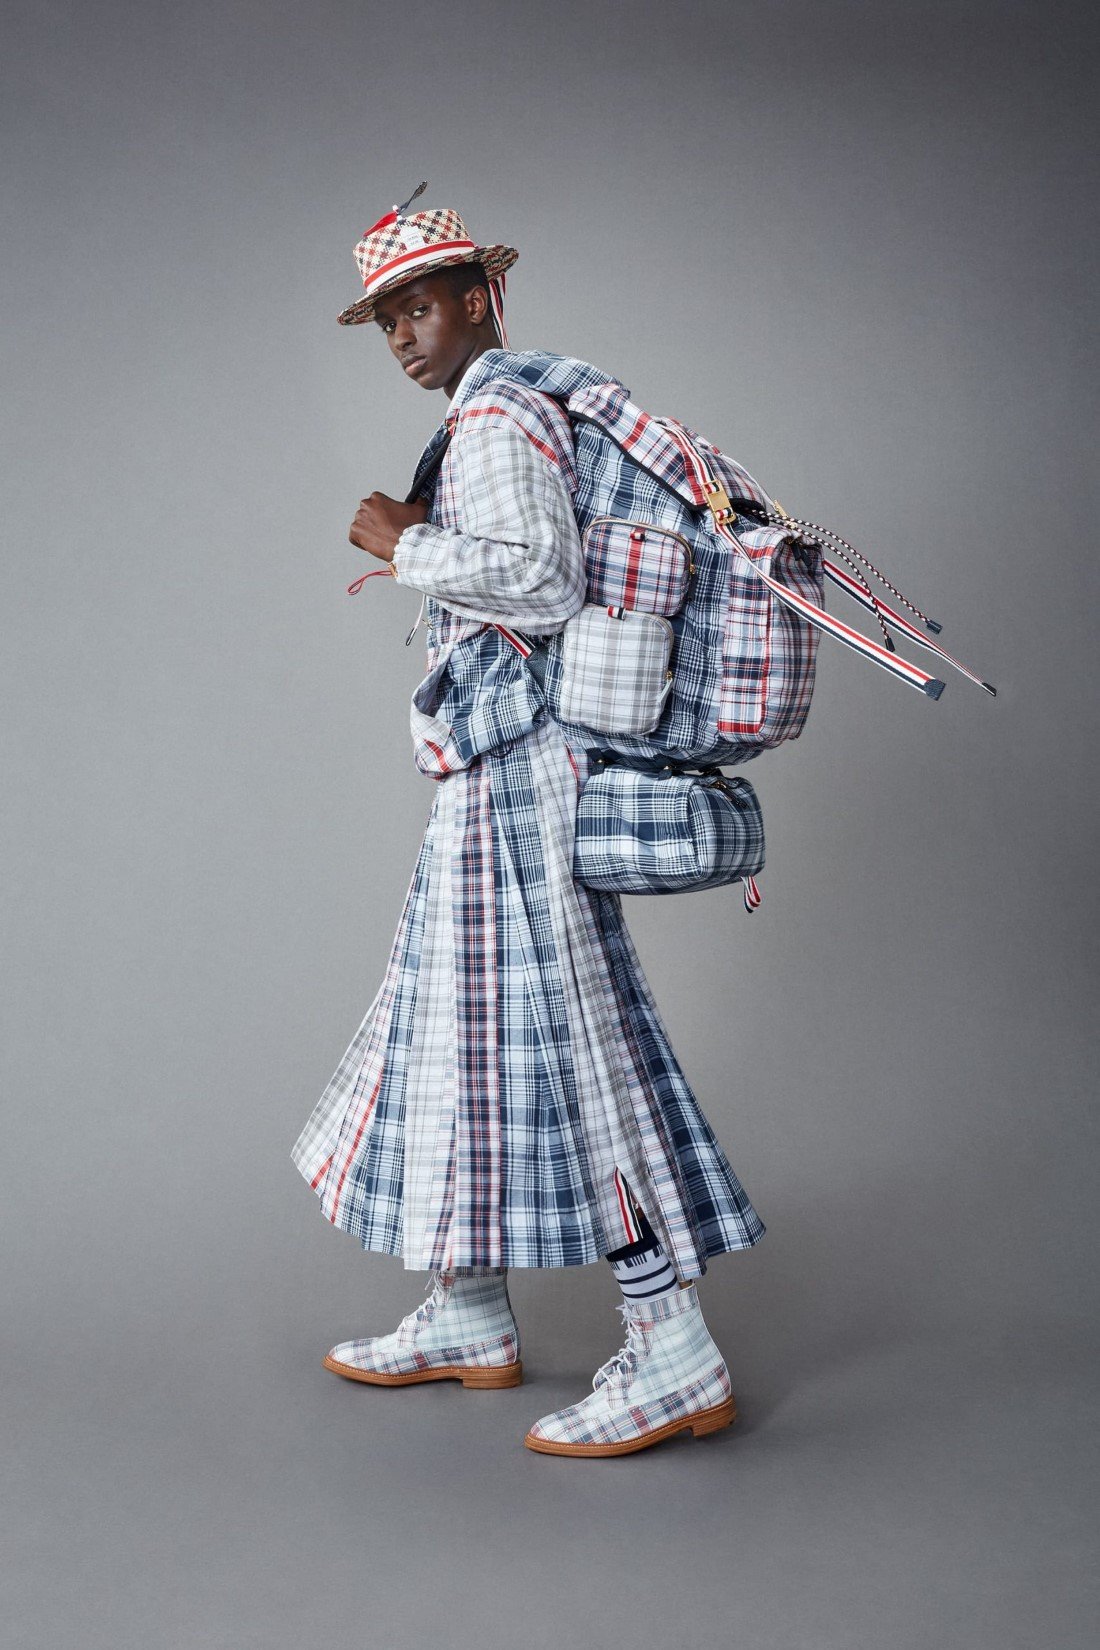 Thom Browne Collection Croisière Homme 2022